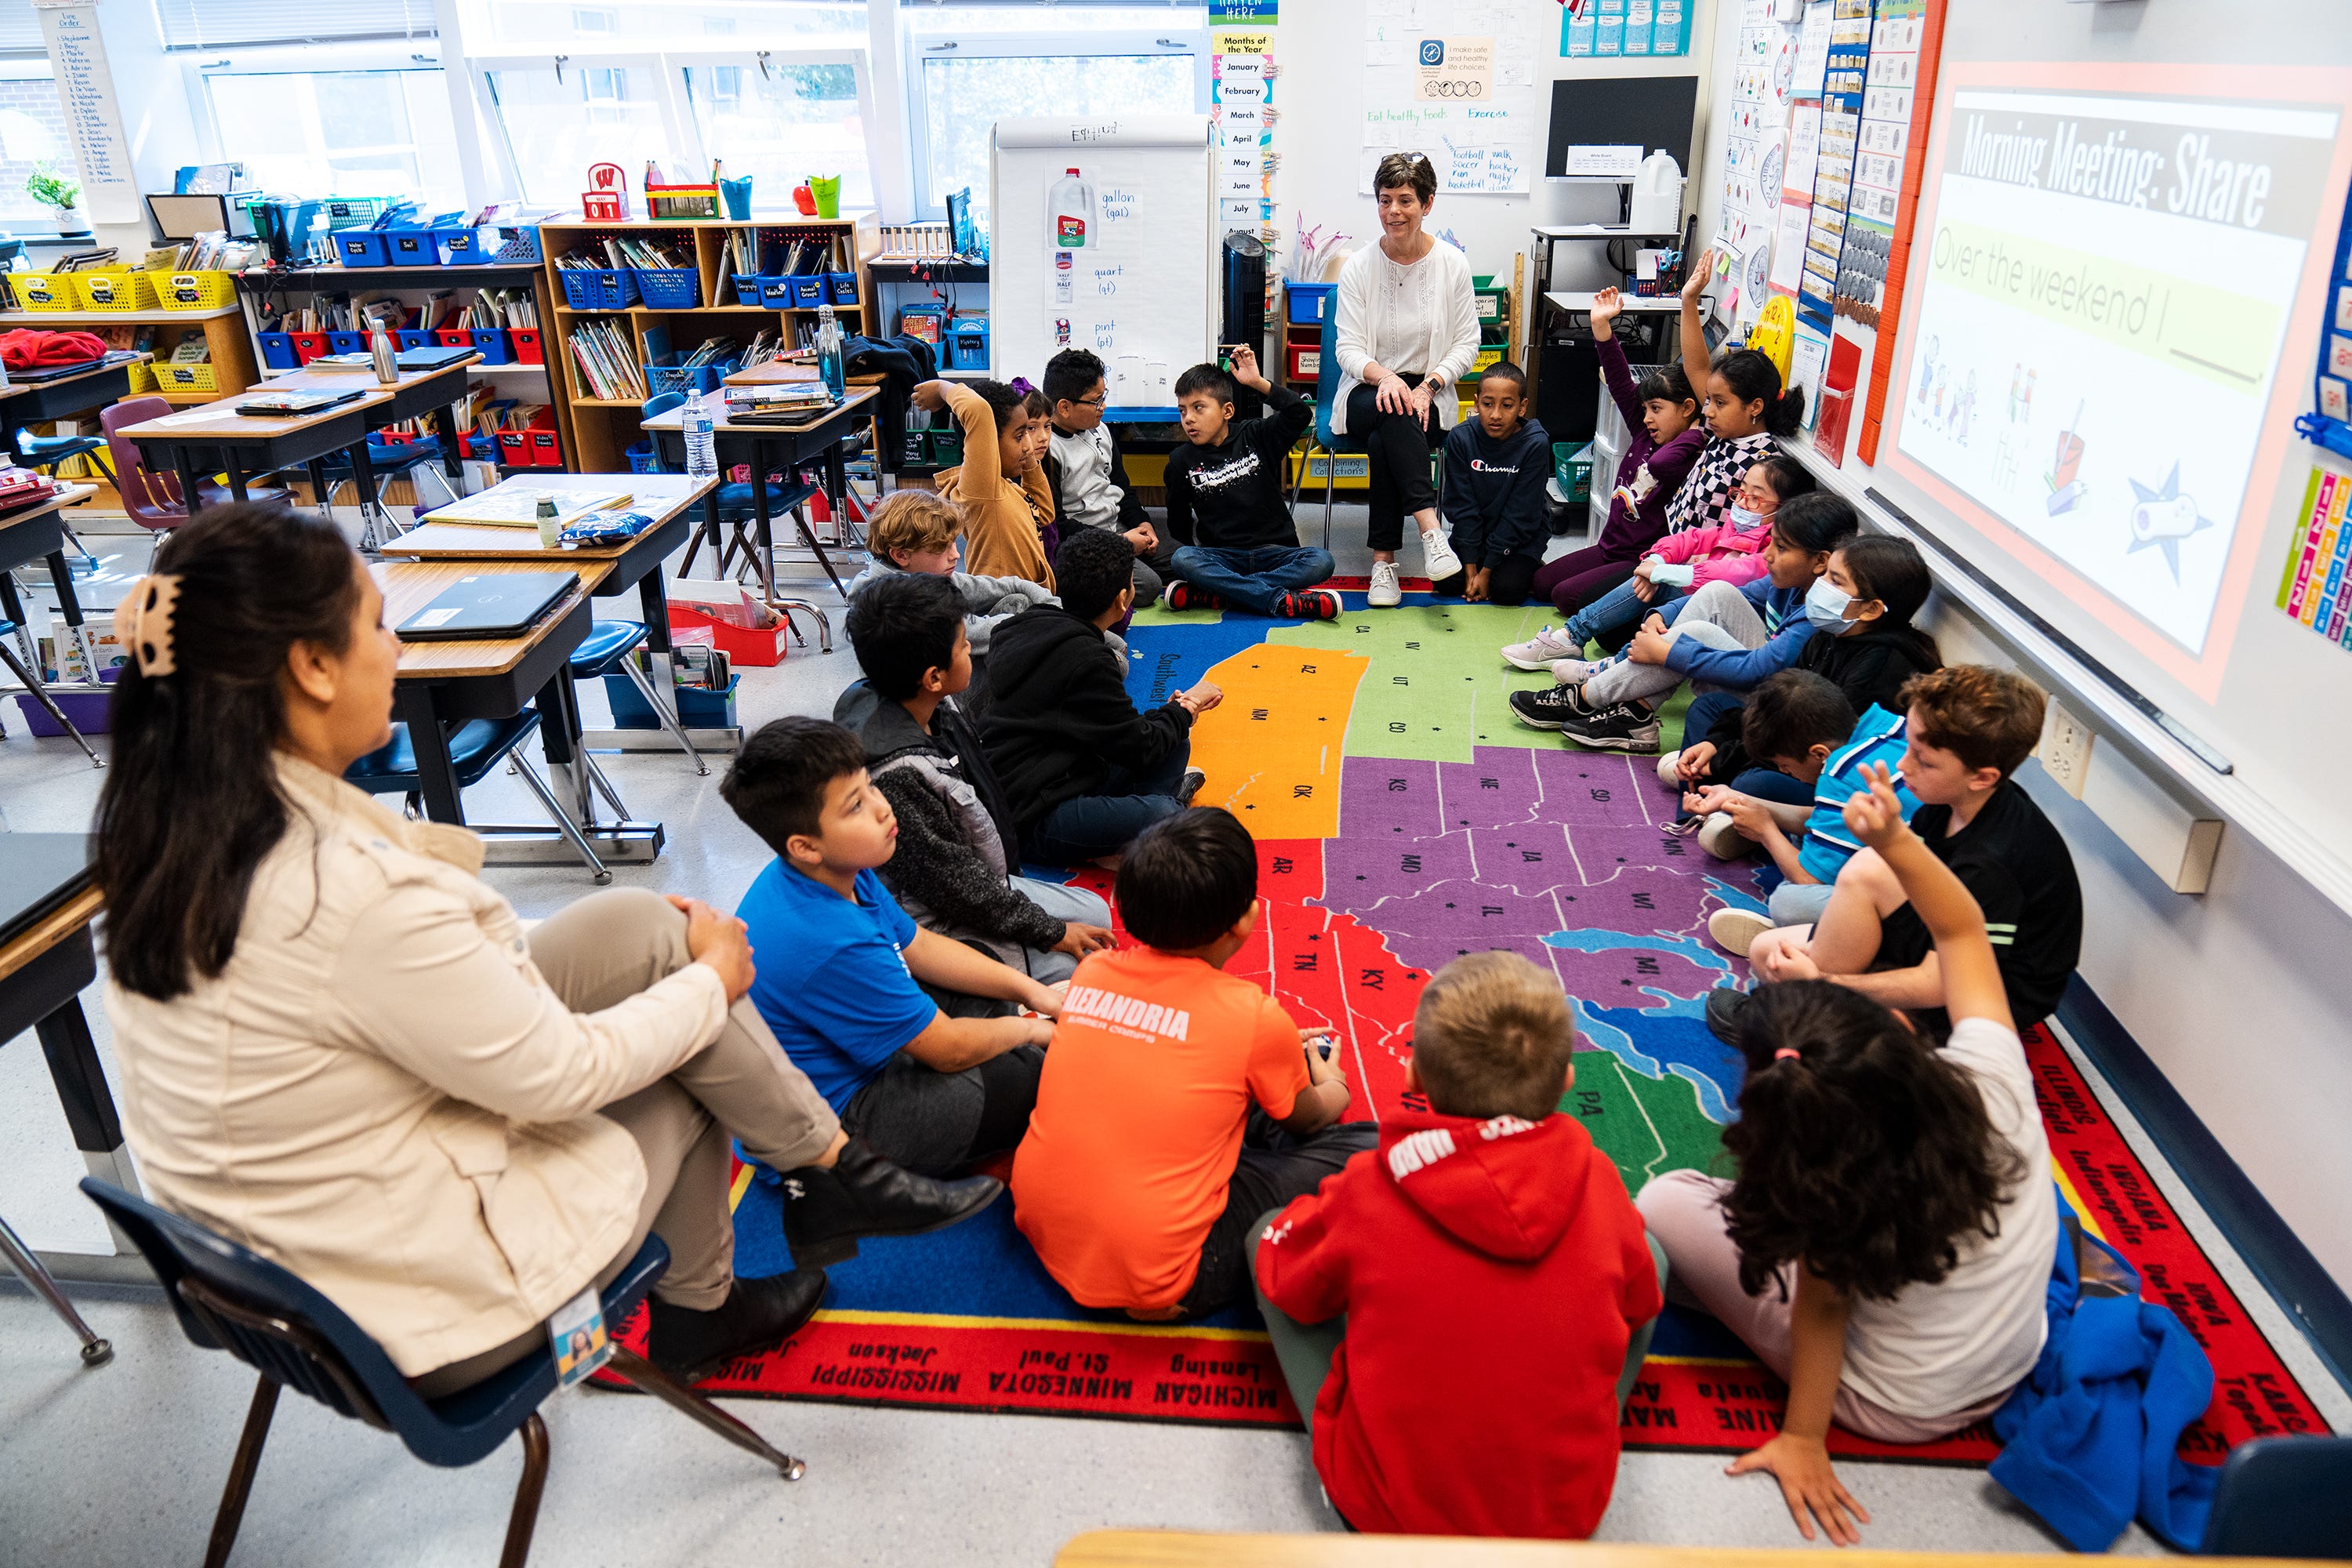 Lisa Cay, (in chair in white) third grade teacher at Sleepy Hollow Elementary School in Falls Church, Va., instructs her students.